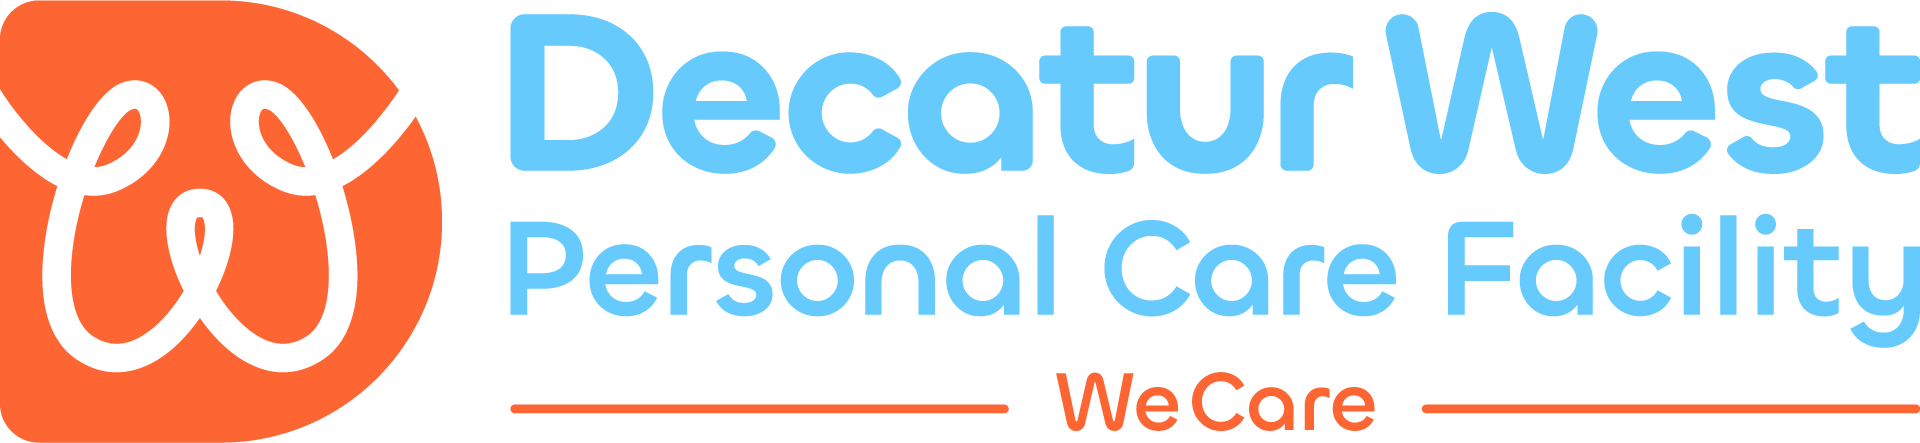 Decatur West Personal Care Facility